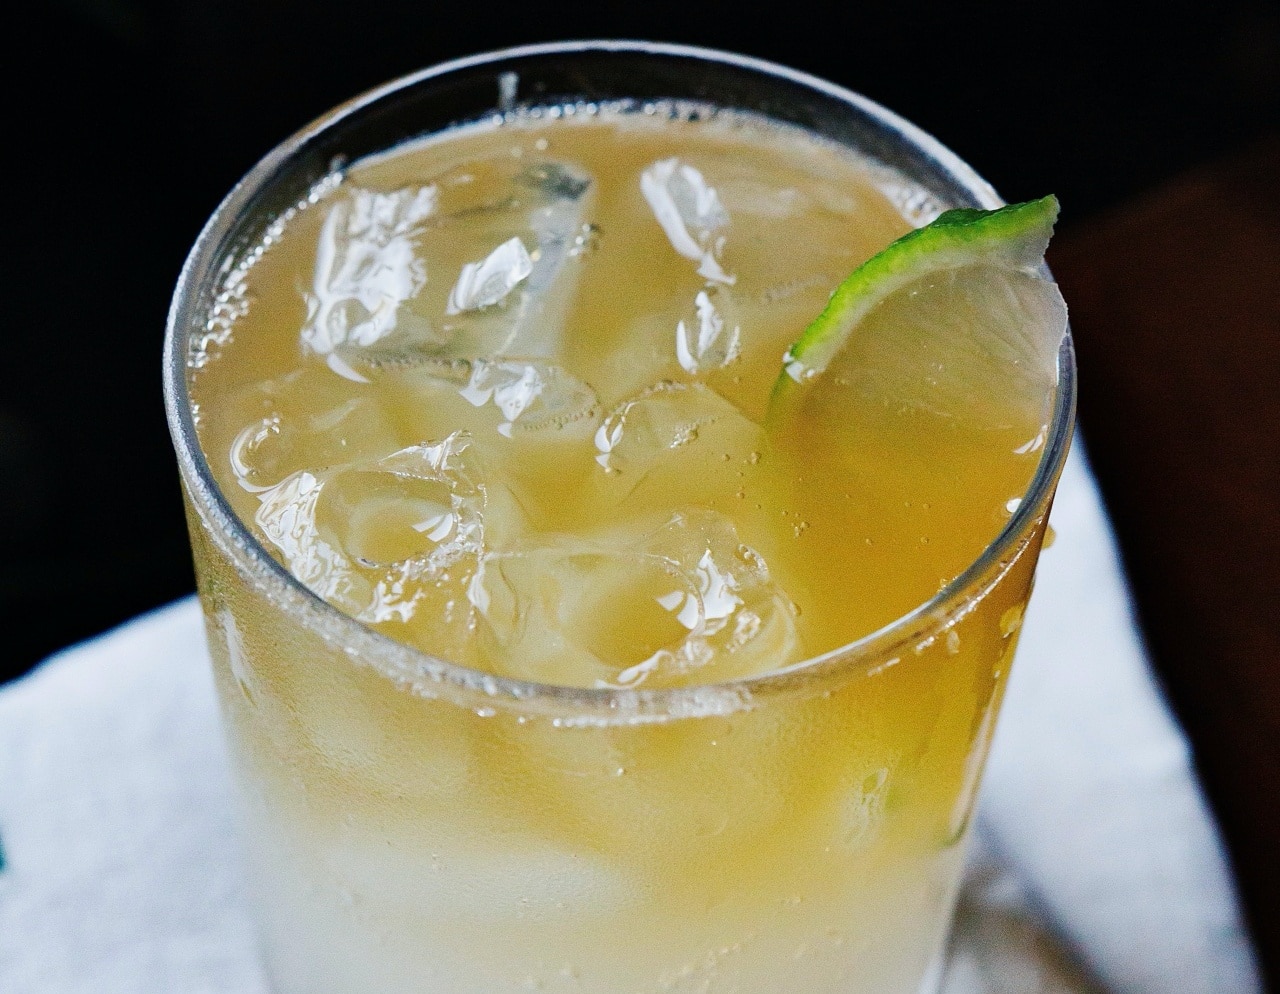 dark-and-stormy-cocktail-recipe-wwy-keenan-featured